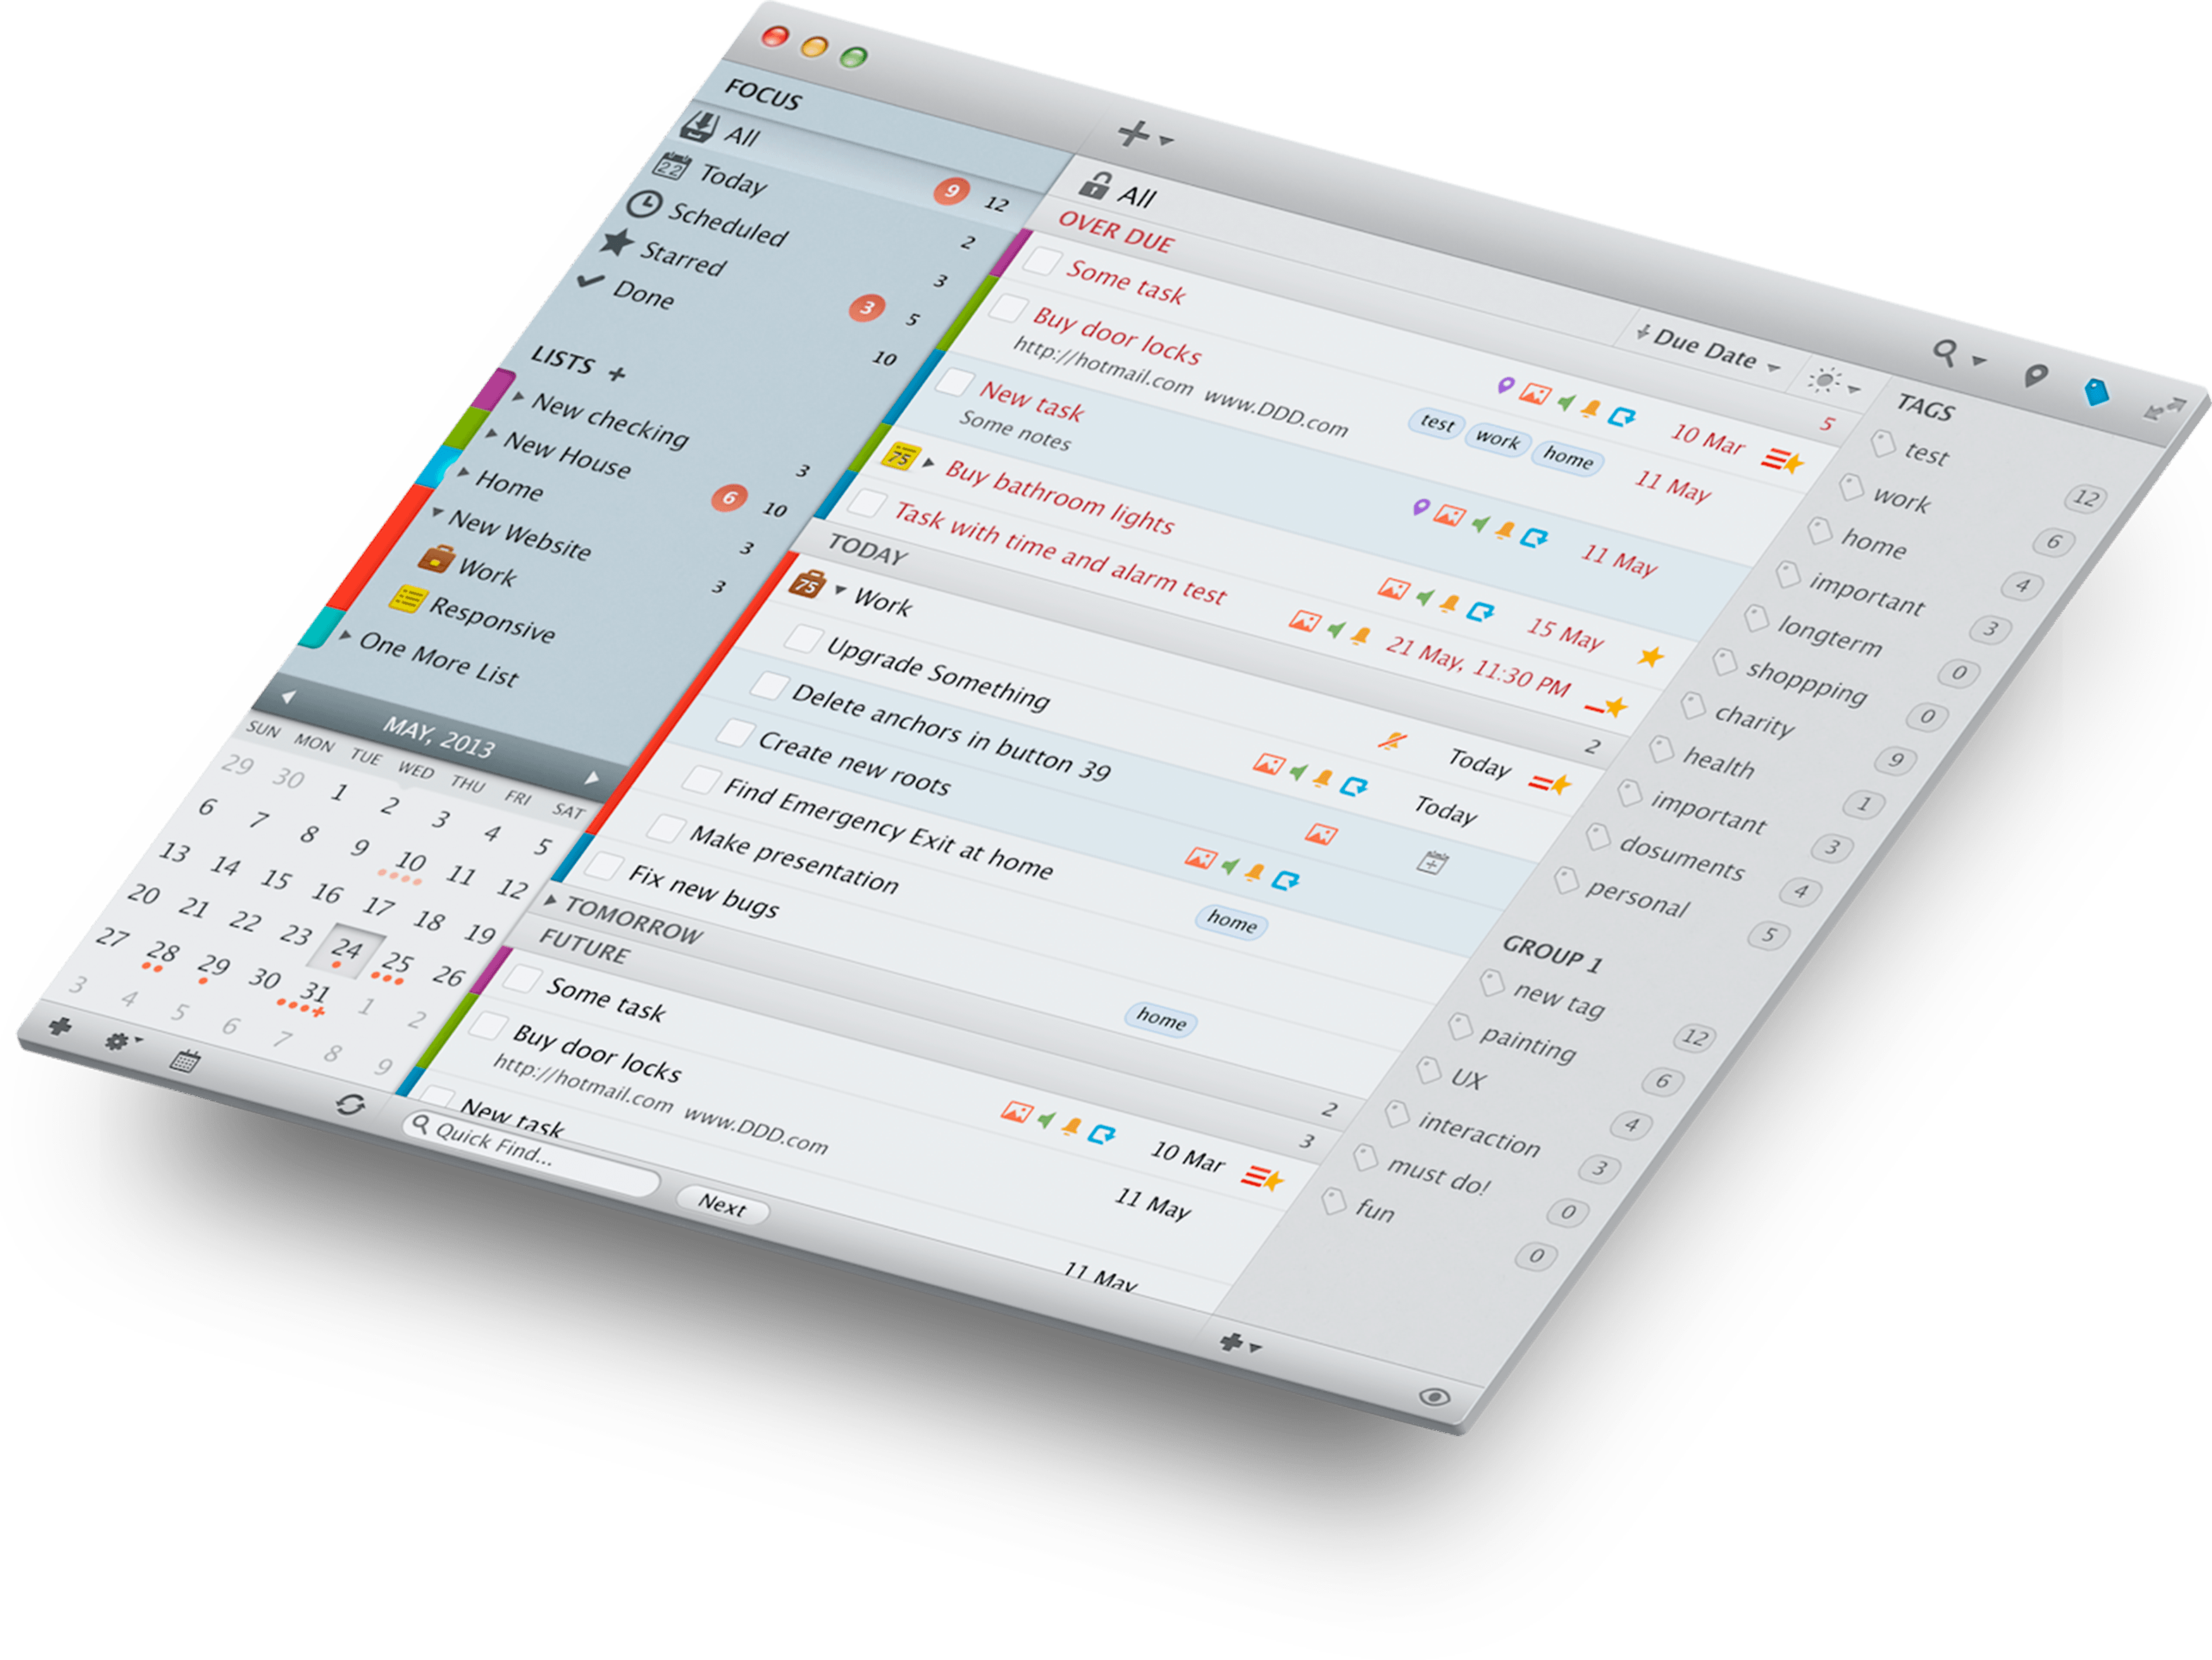 Graphical User Interface - All tasks